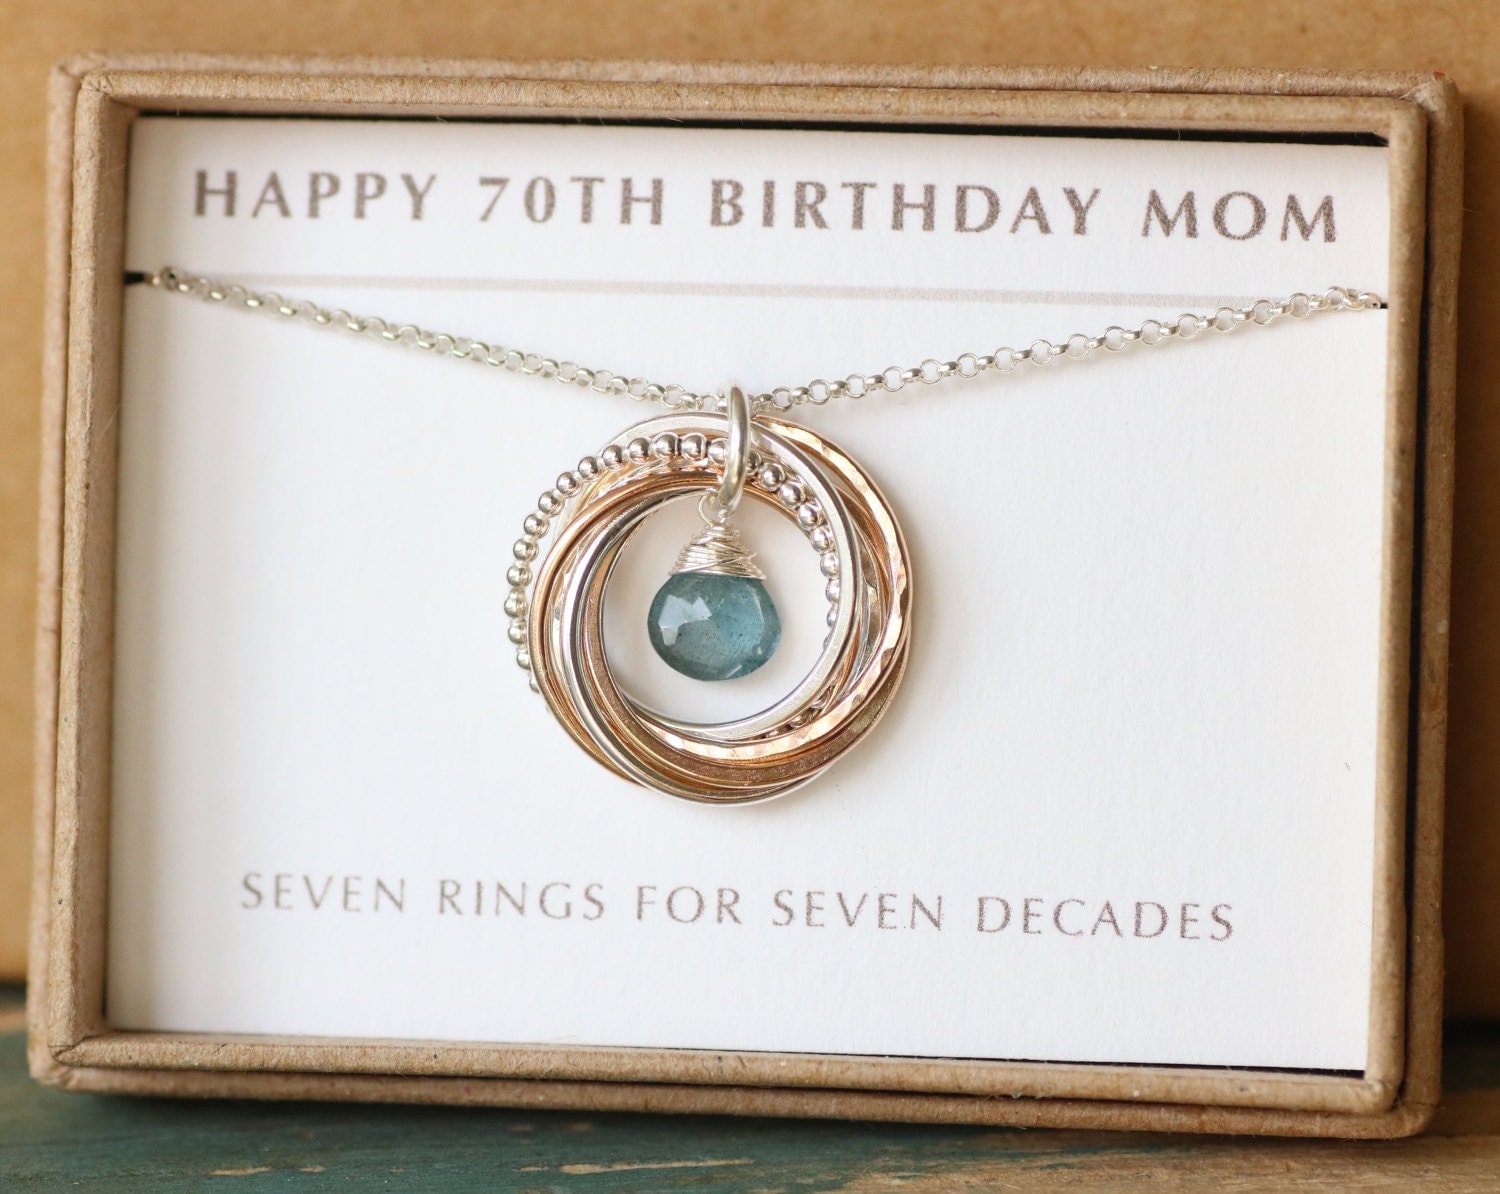 Wife Birthday Gift Ideas : 10 Affordable Gift Ideas SHE Will LOVE Under $30 ... : Gift ideas can sometimes be difficult to think of, but this birthstone necklace is wonderful for a wife who is also a mother.